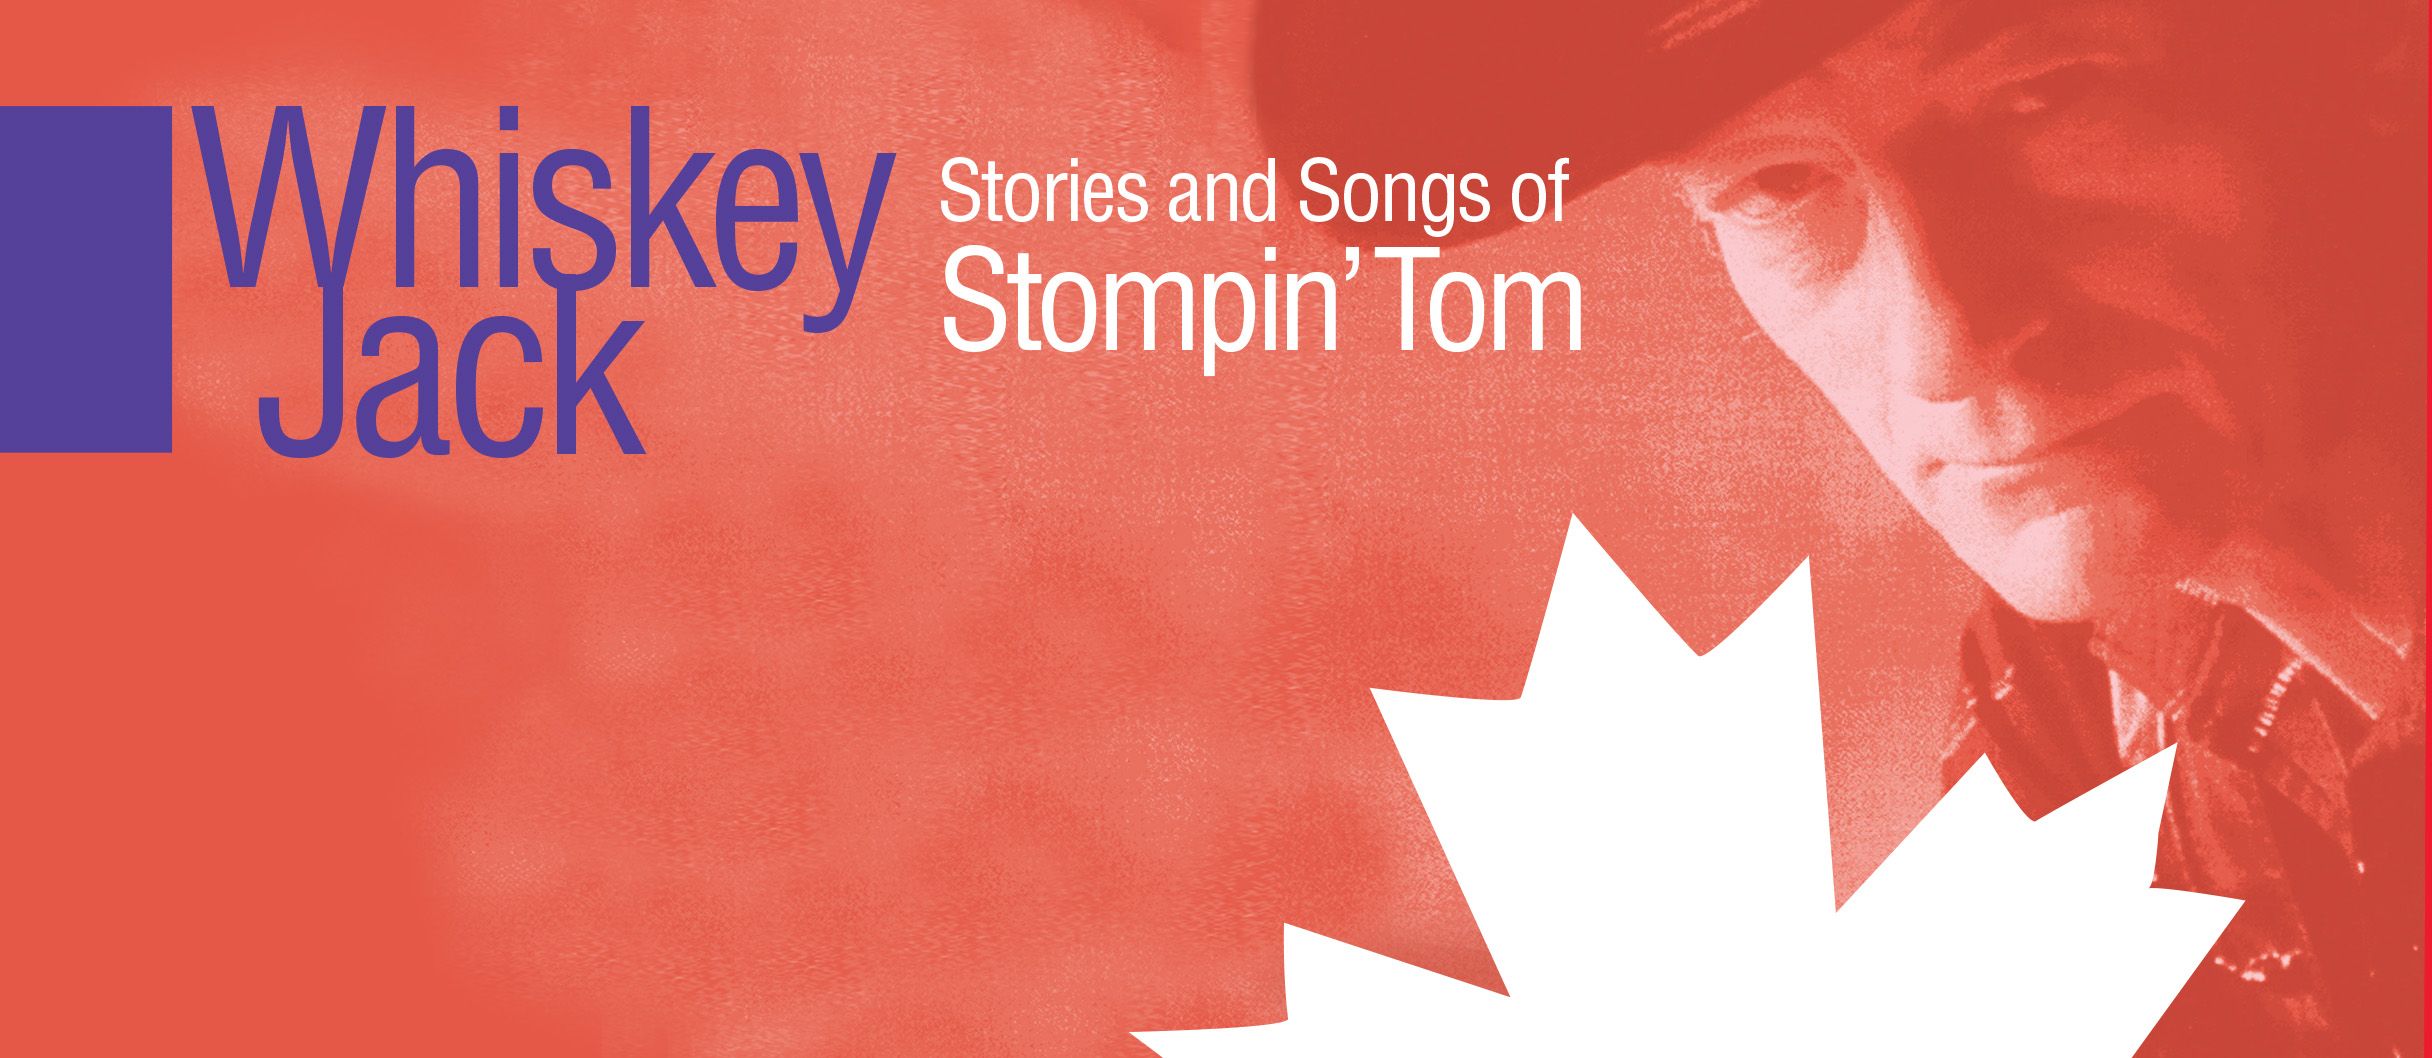 Stories & Songs of Stompin' Tom featuring Whiskey Jack and guests